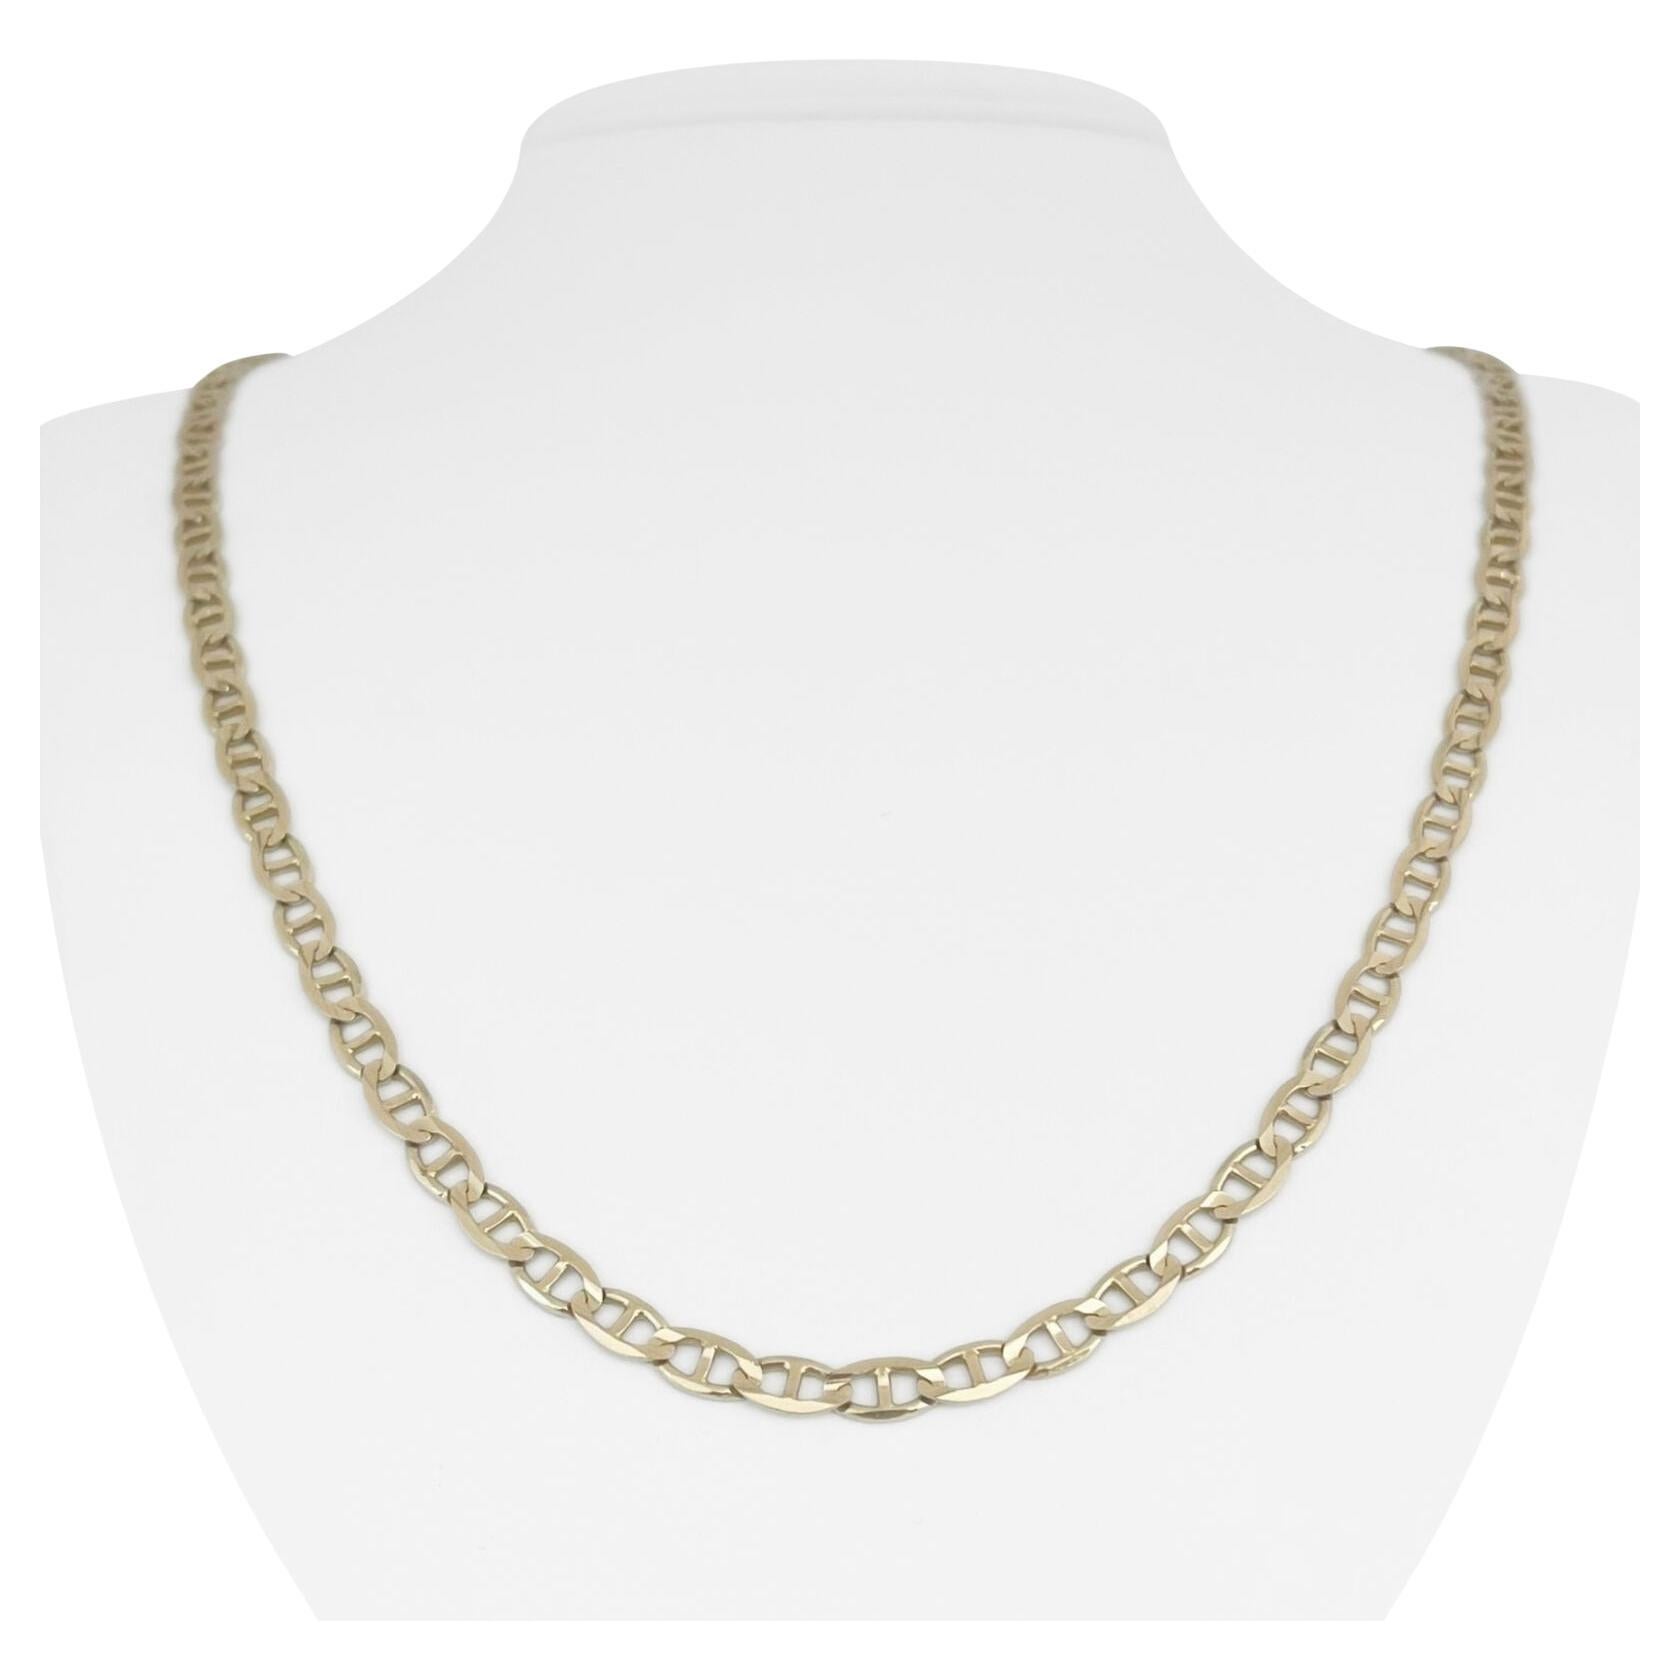 GOLD Chain Bag Strap - Thick Classy Curb w/ Diamond Cut Accents - 3/8 Wide  - Choose Length & Clasps